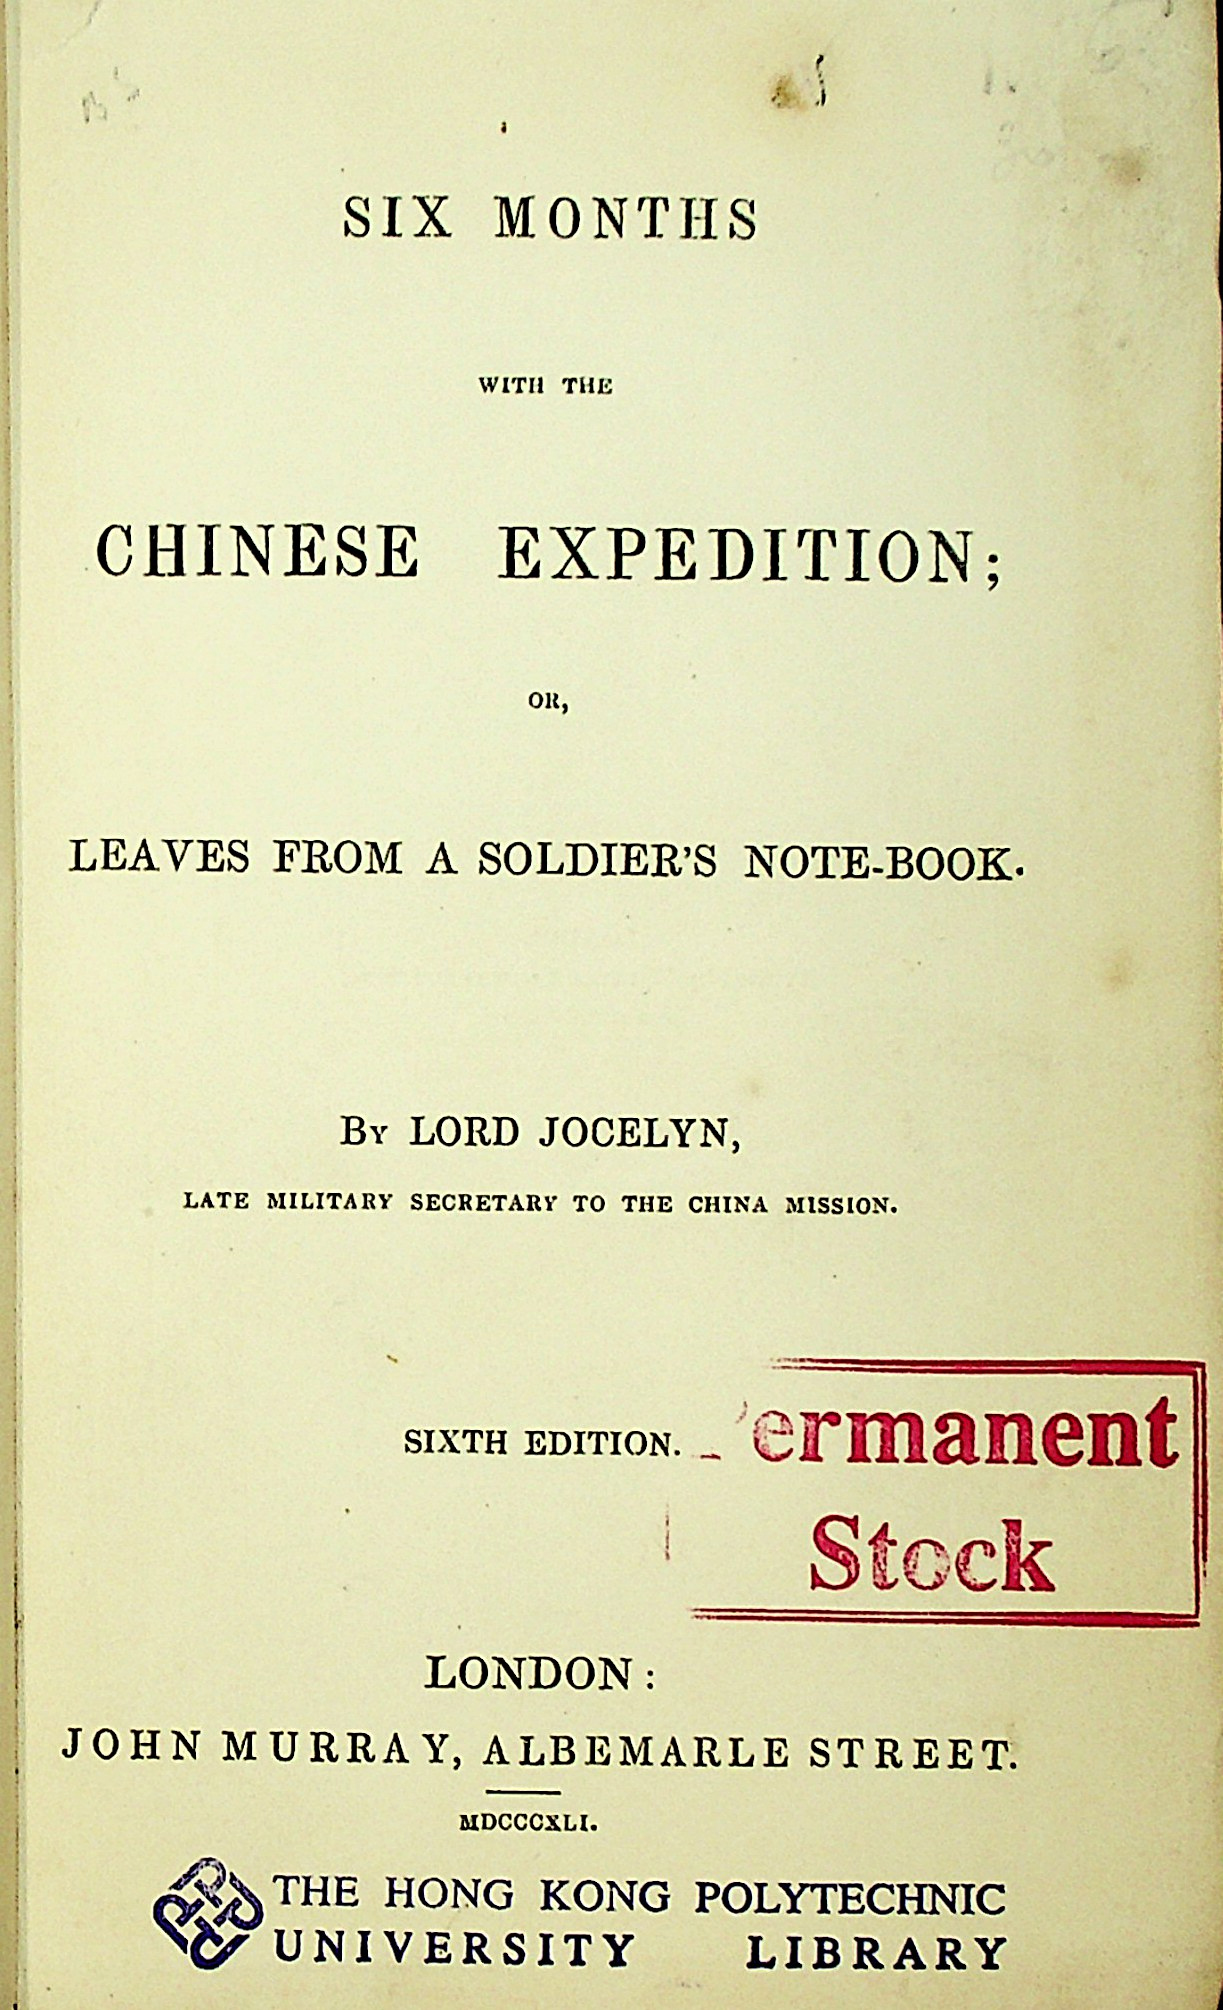 Six months with the Chinese expedition; or, Leave from a soldier's note-book 